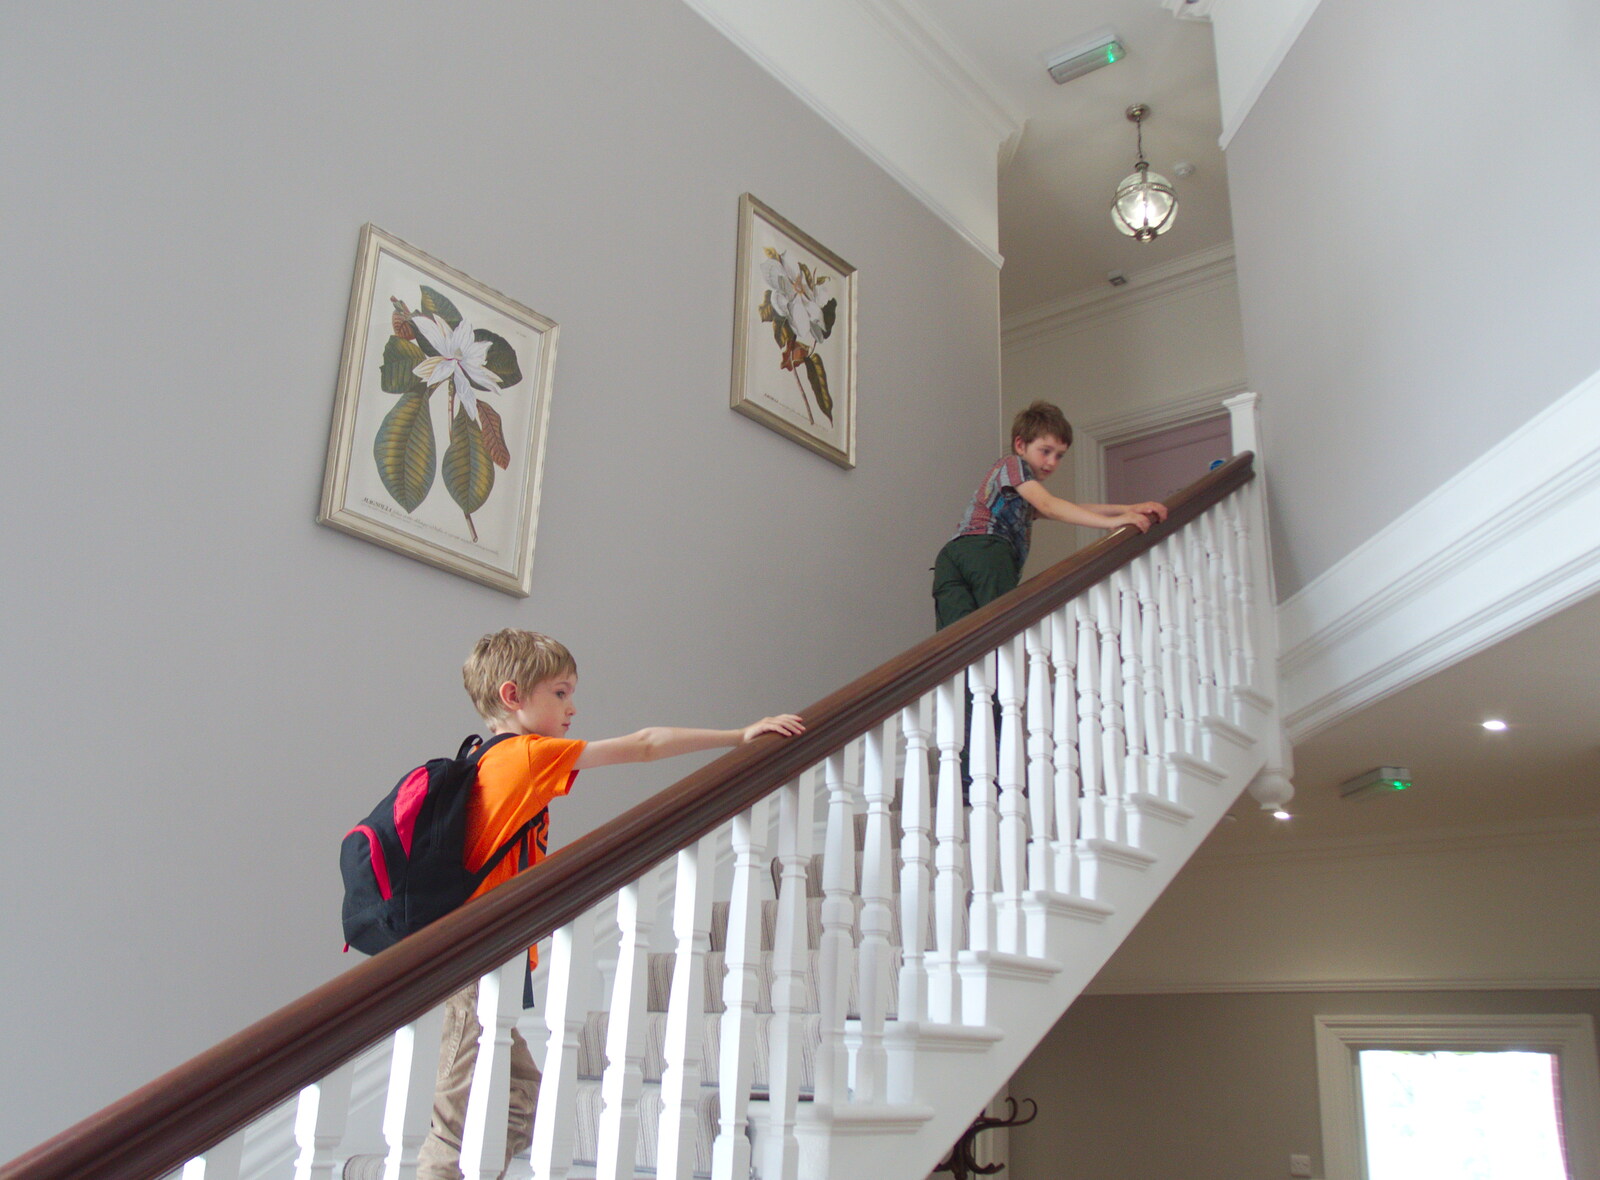 Chagford Lido and a Trip to Parke, Bovey Tracey, Devon - 25th May 2019: The boys climb the grand staircase